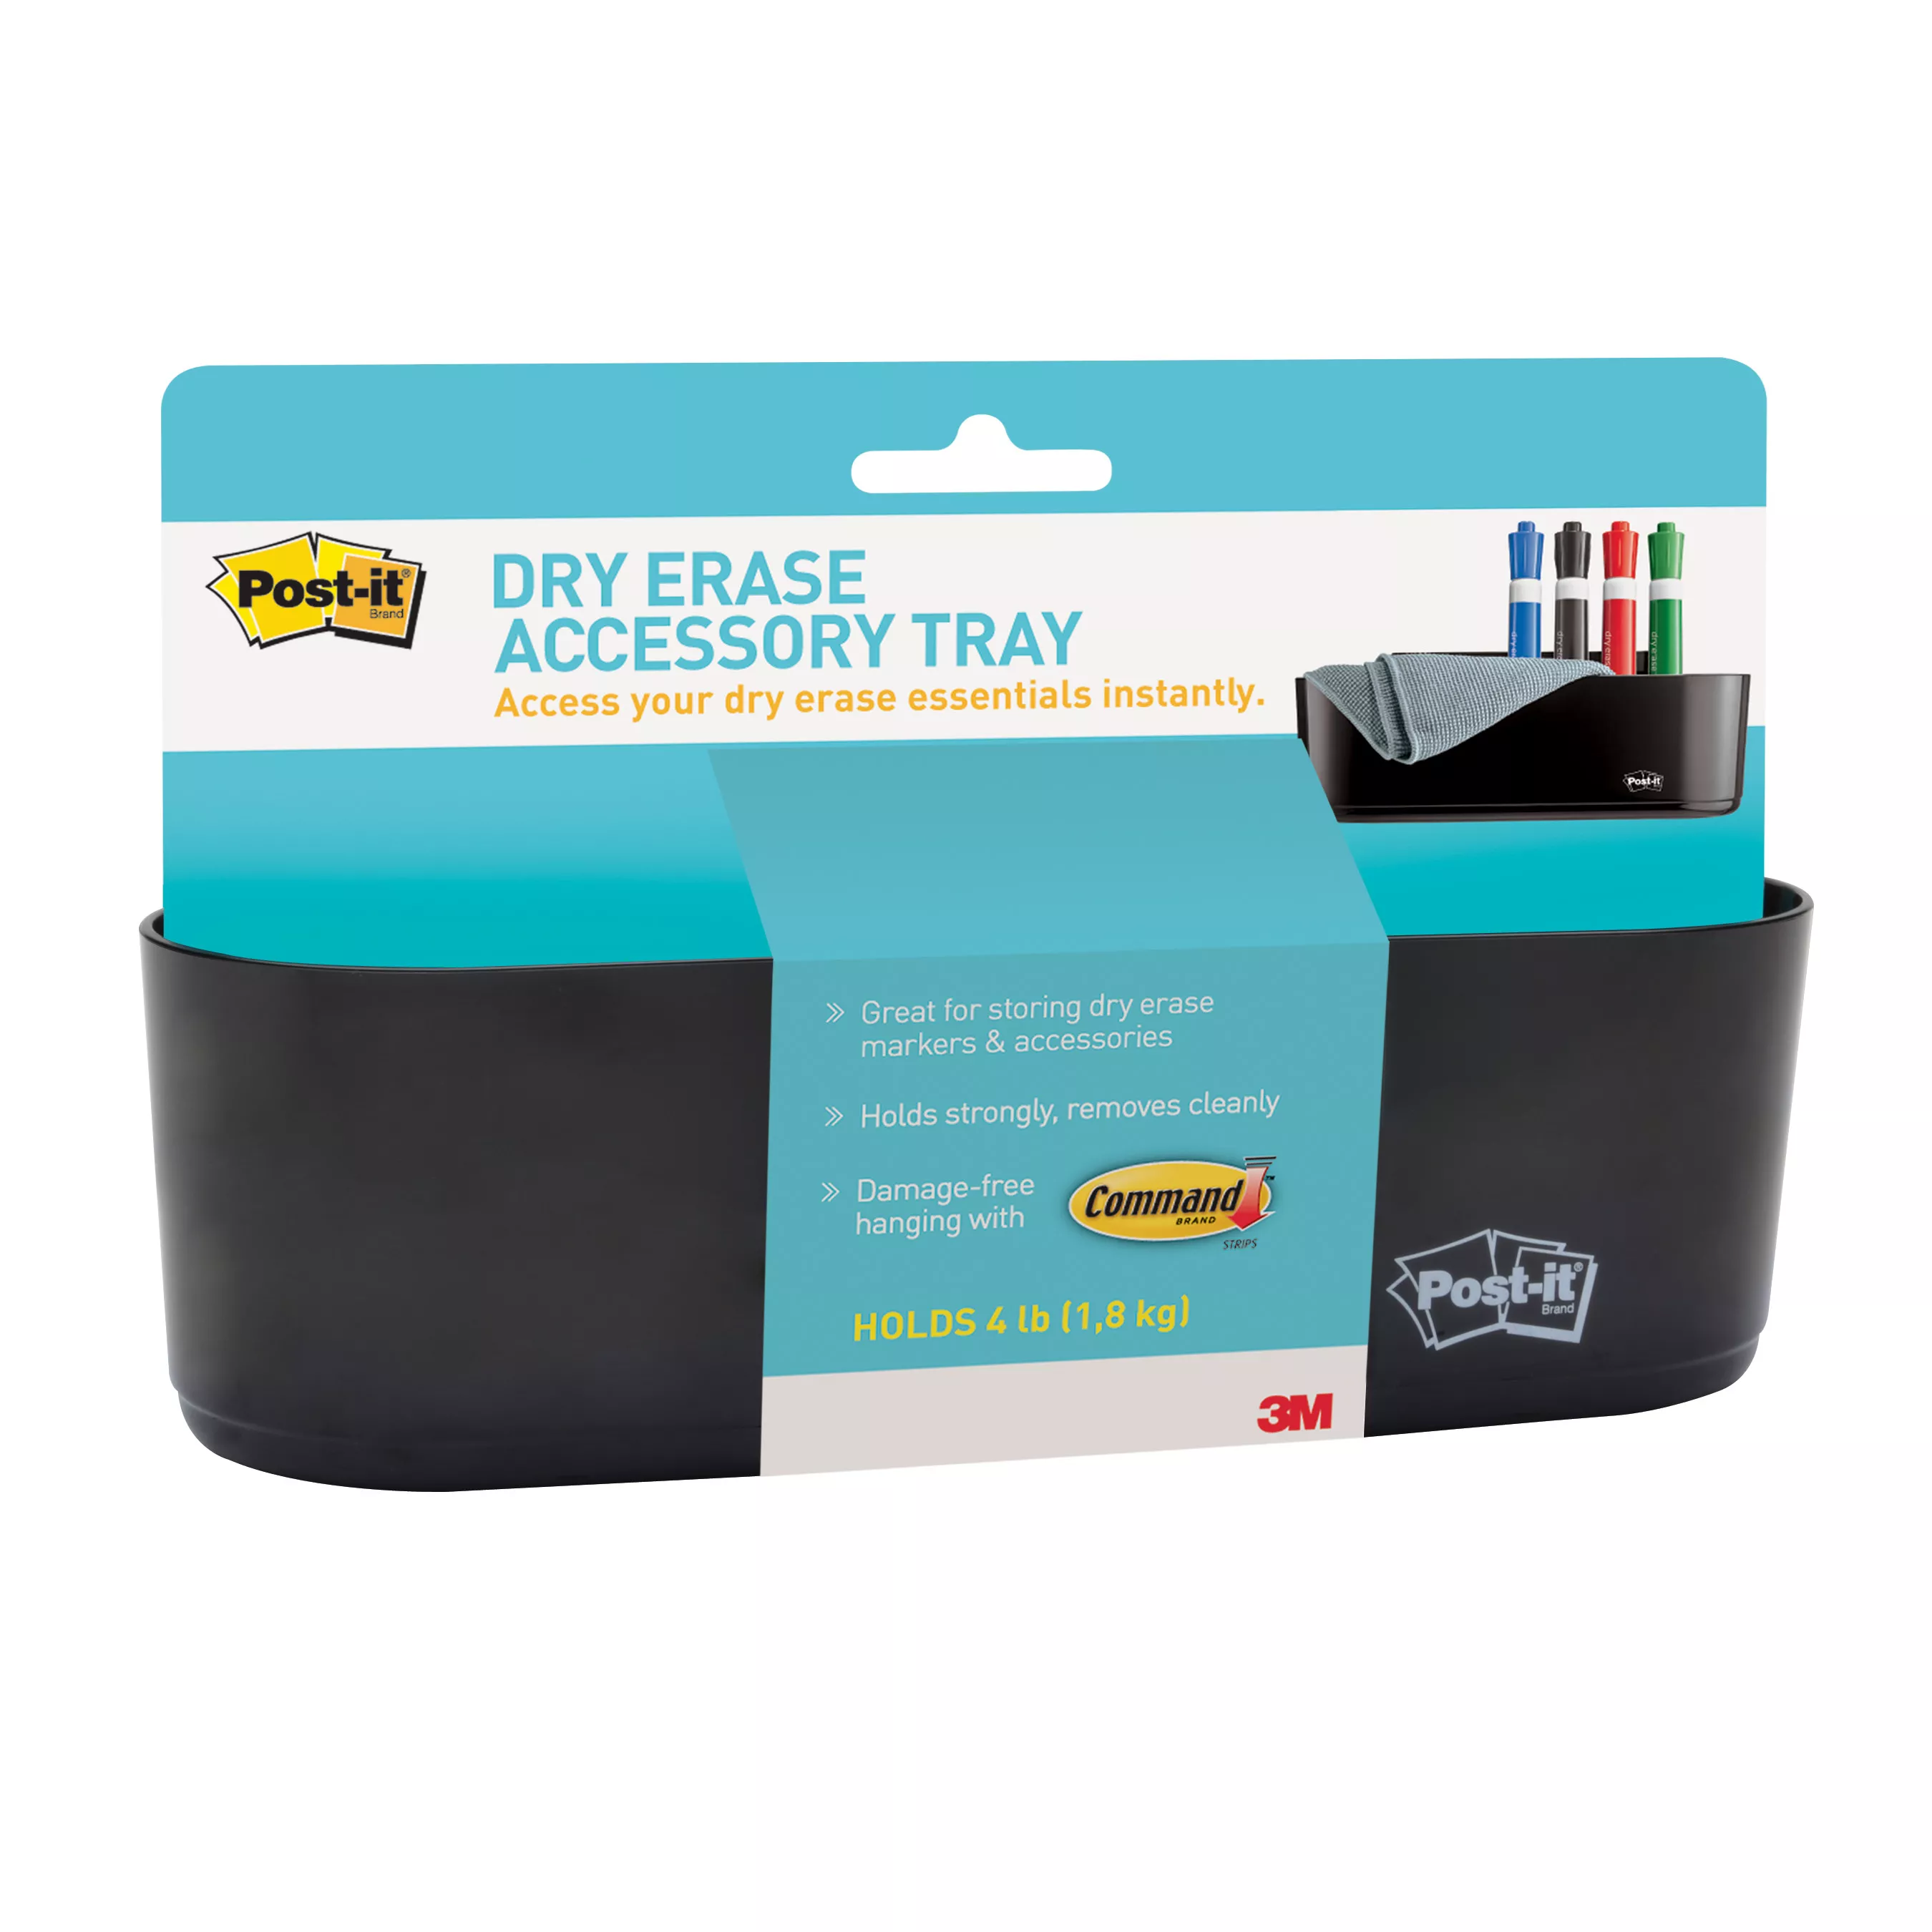 Product Number DEFTRAY | Post-it® Dry Erase Accessory Tray DEFTRAY